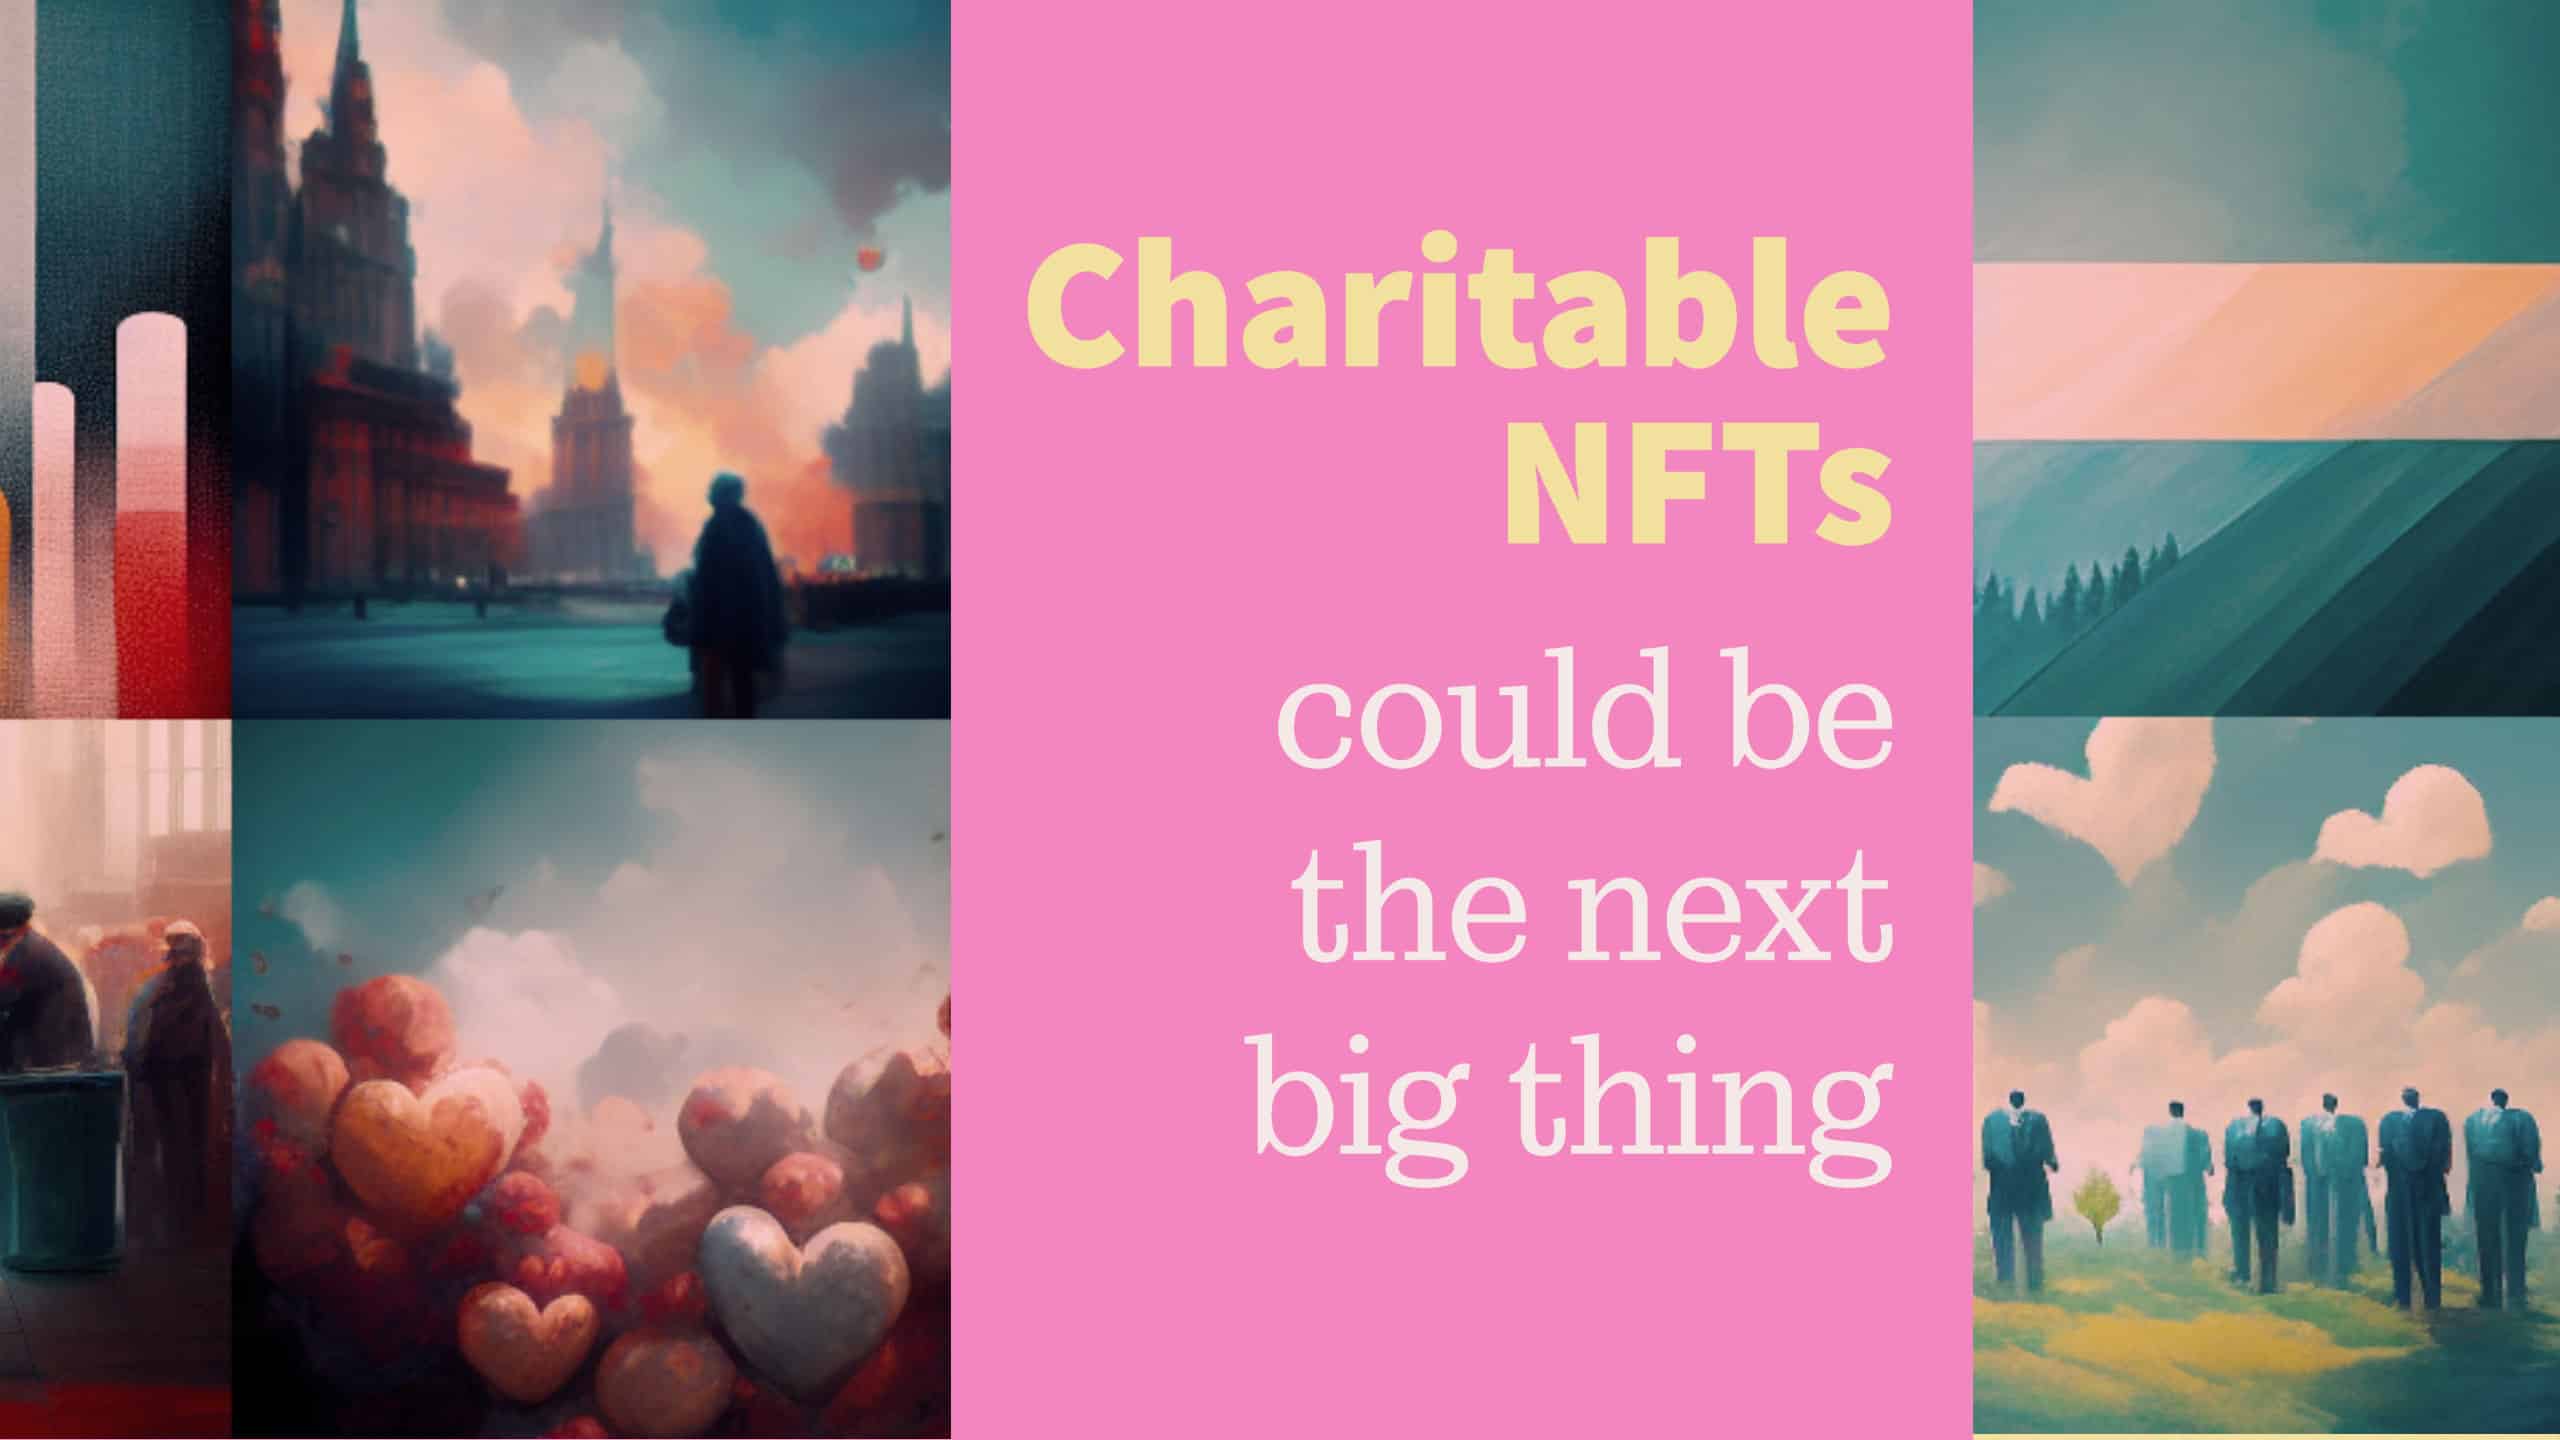 Charitable NFTs could be the next big thing